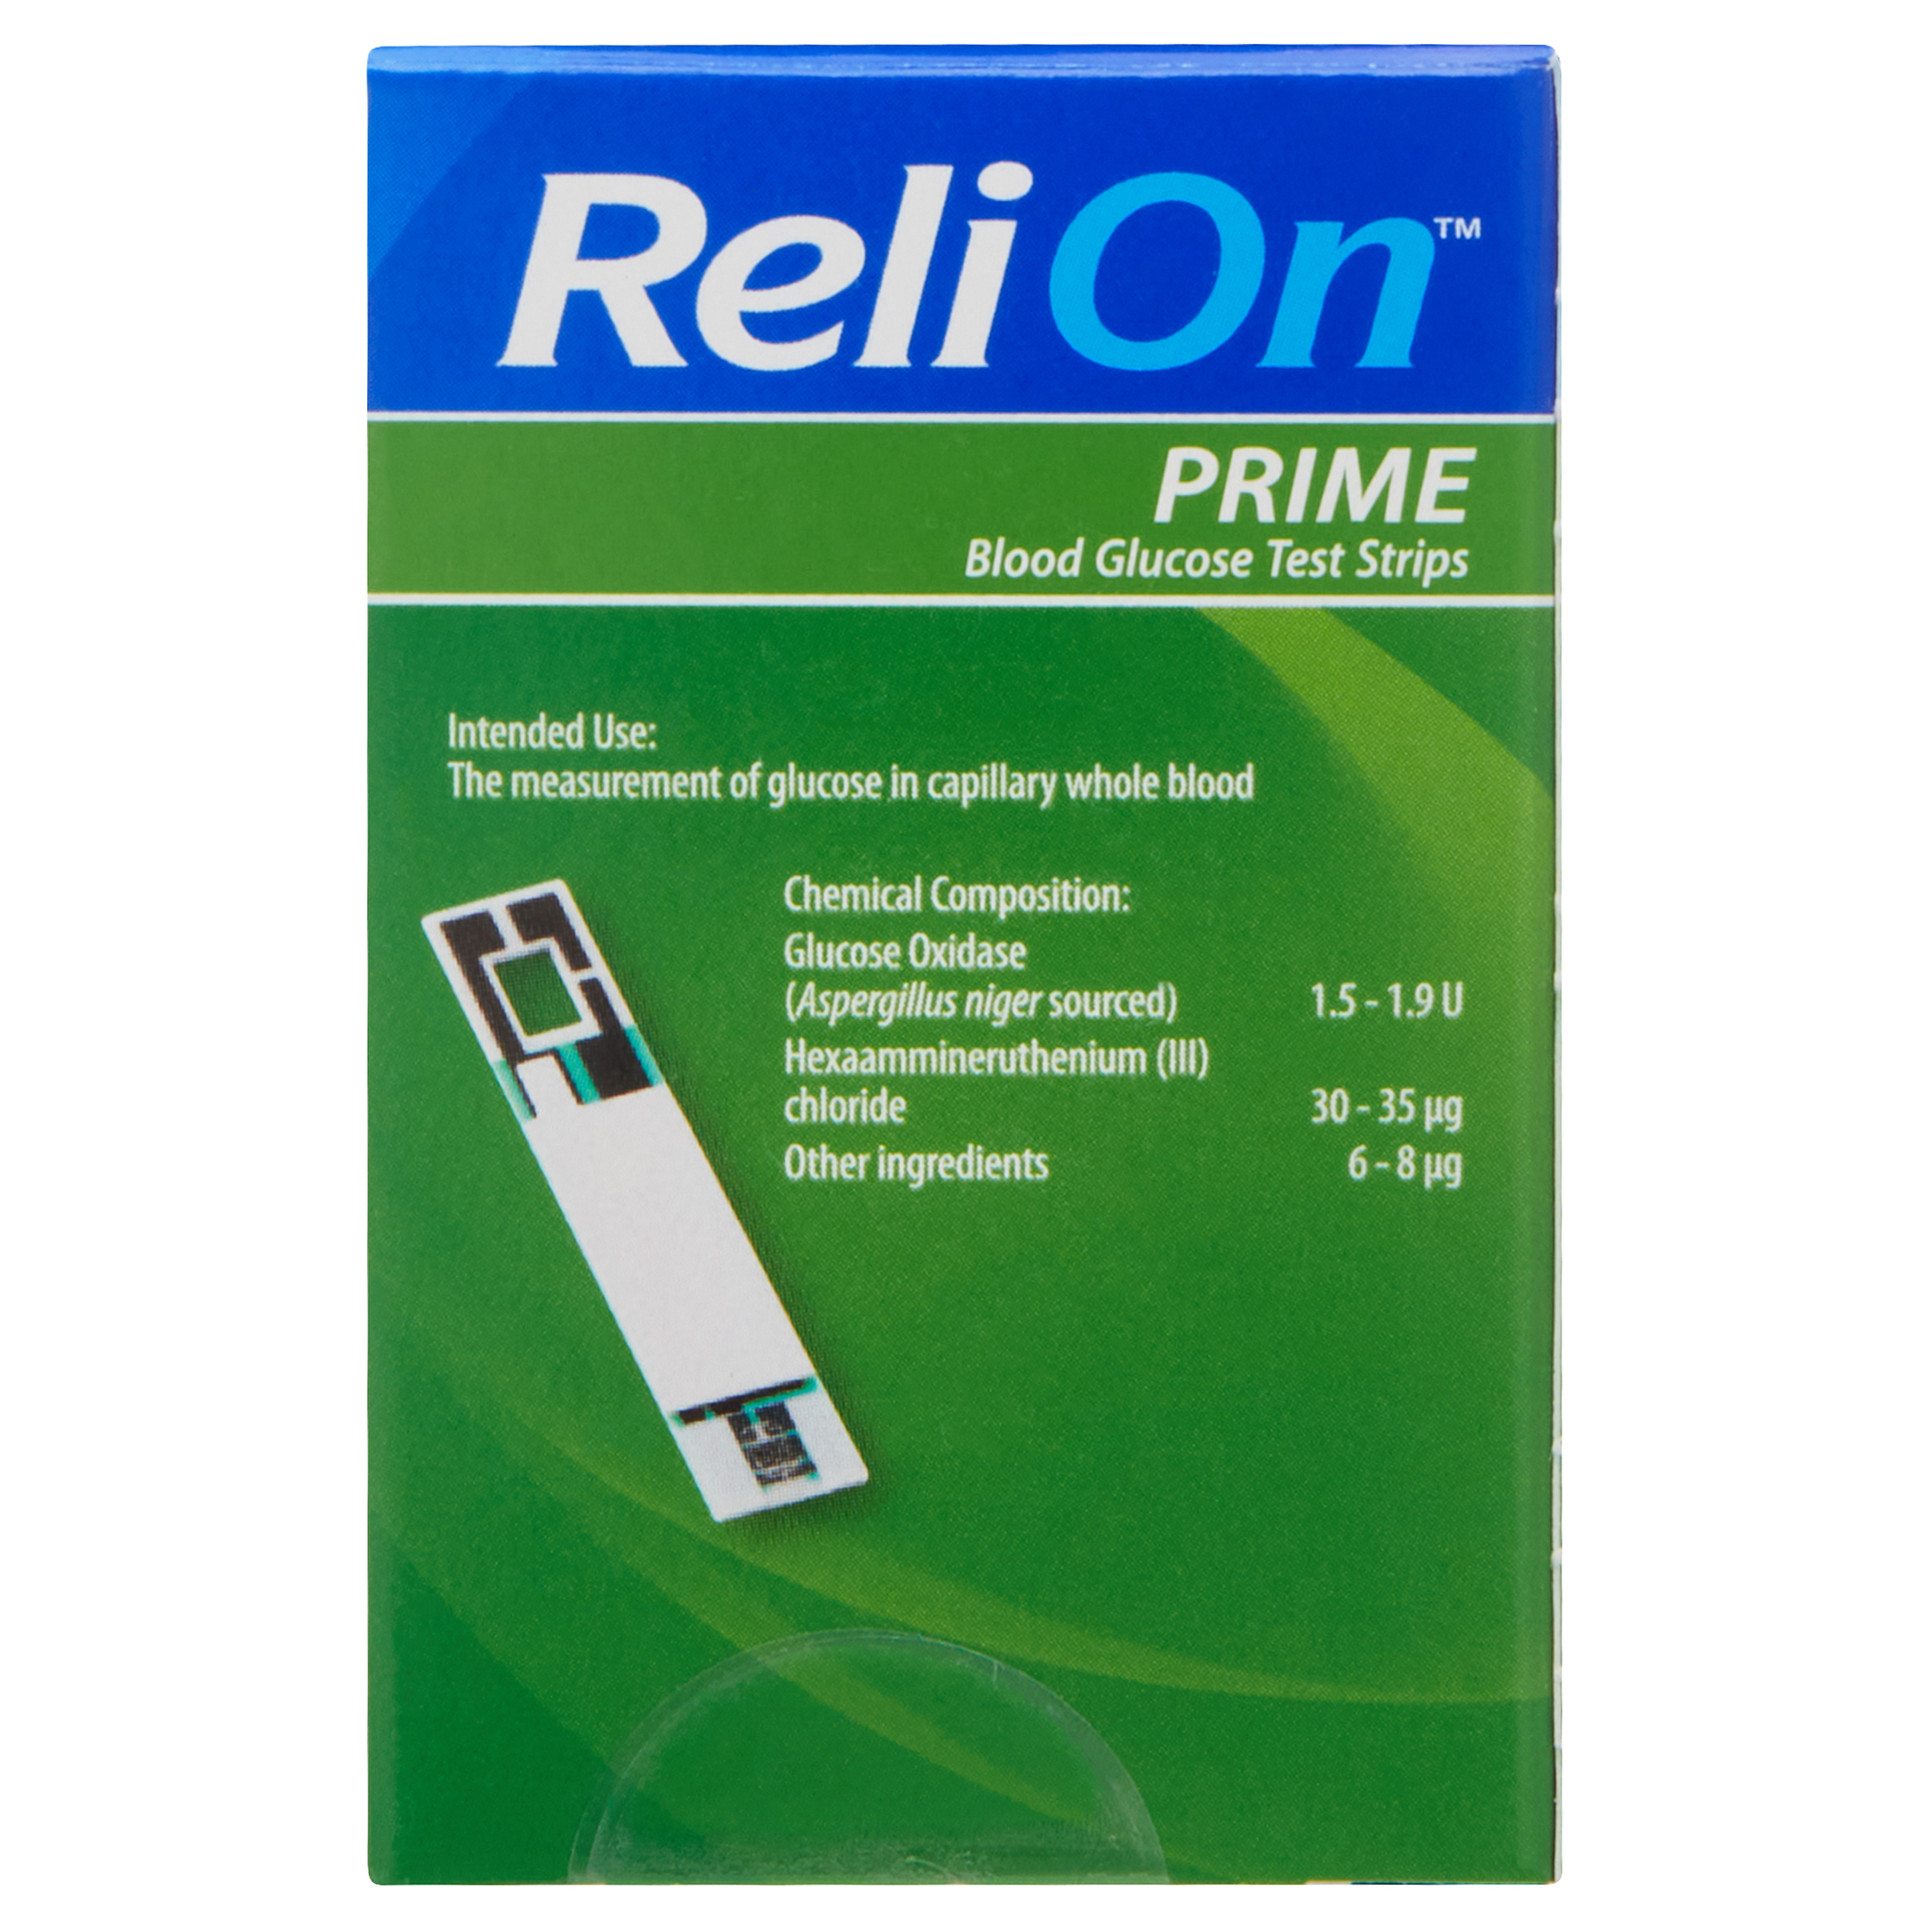 ReliOn Prime Blood Glucose Test Strips, 50 Count - image 5 of 8